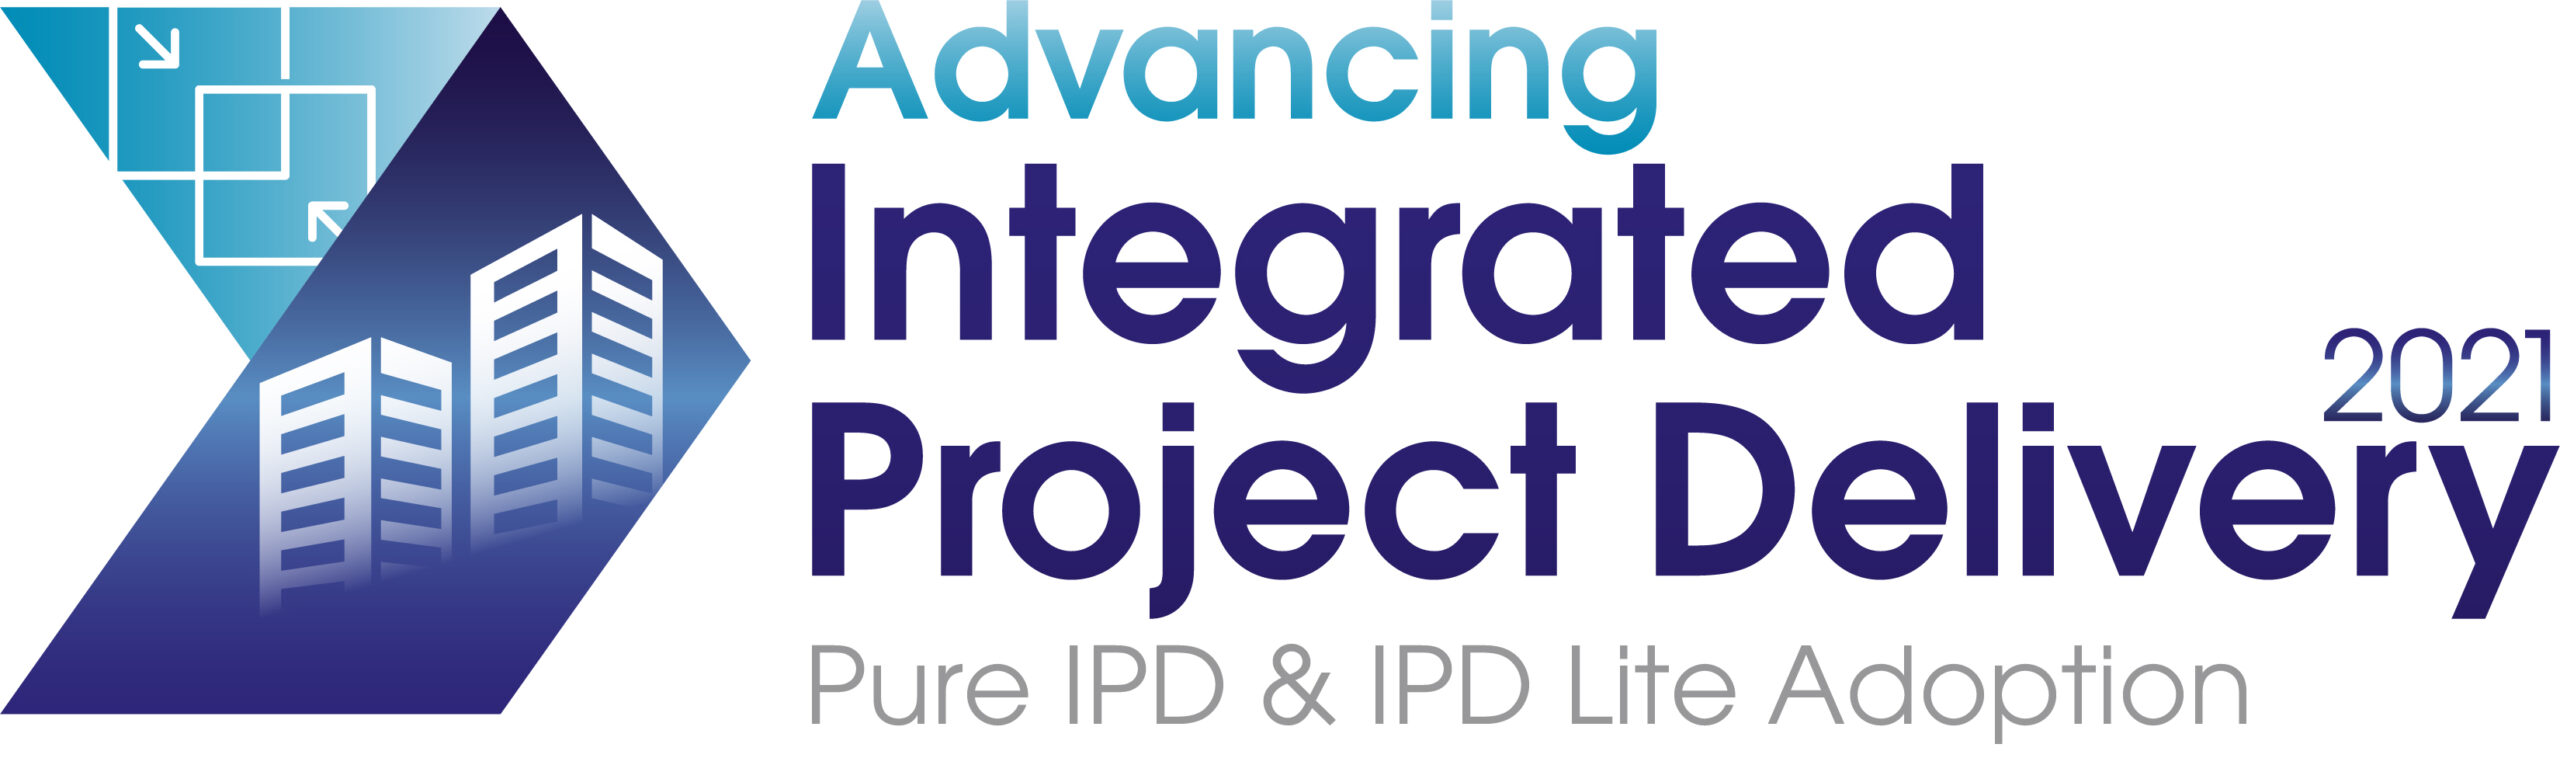 HW210719 Advancing Integrated Project Delivery 2021 logo